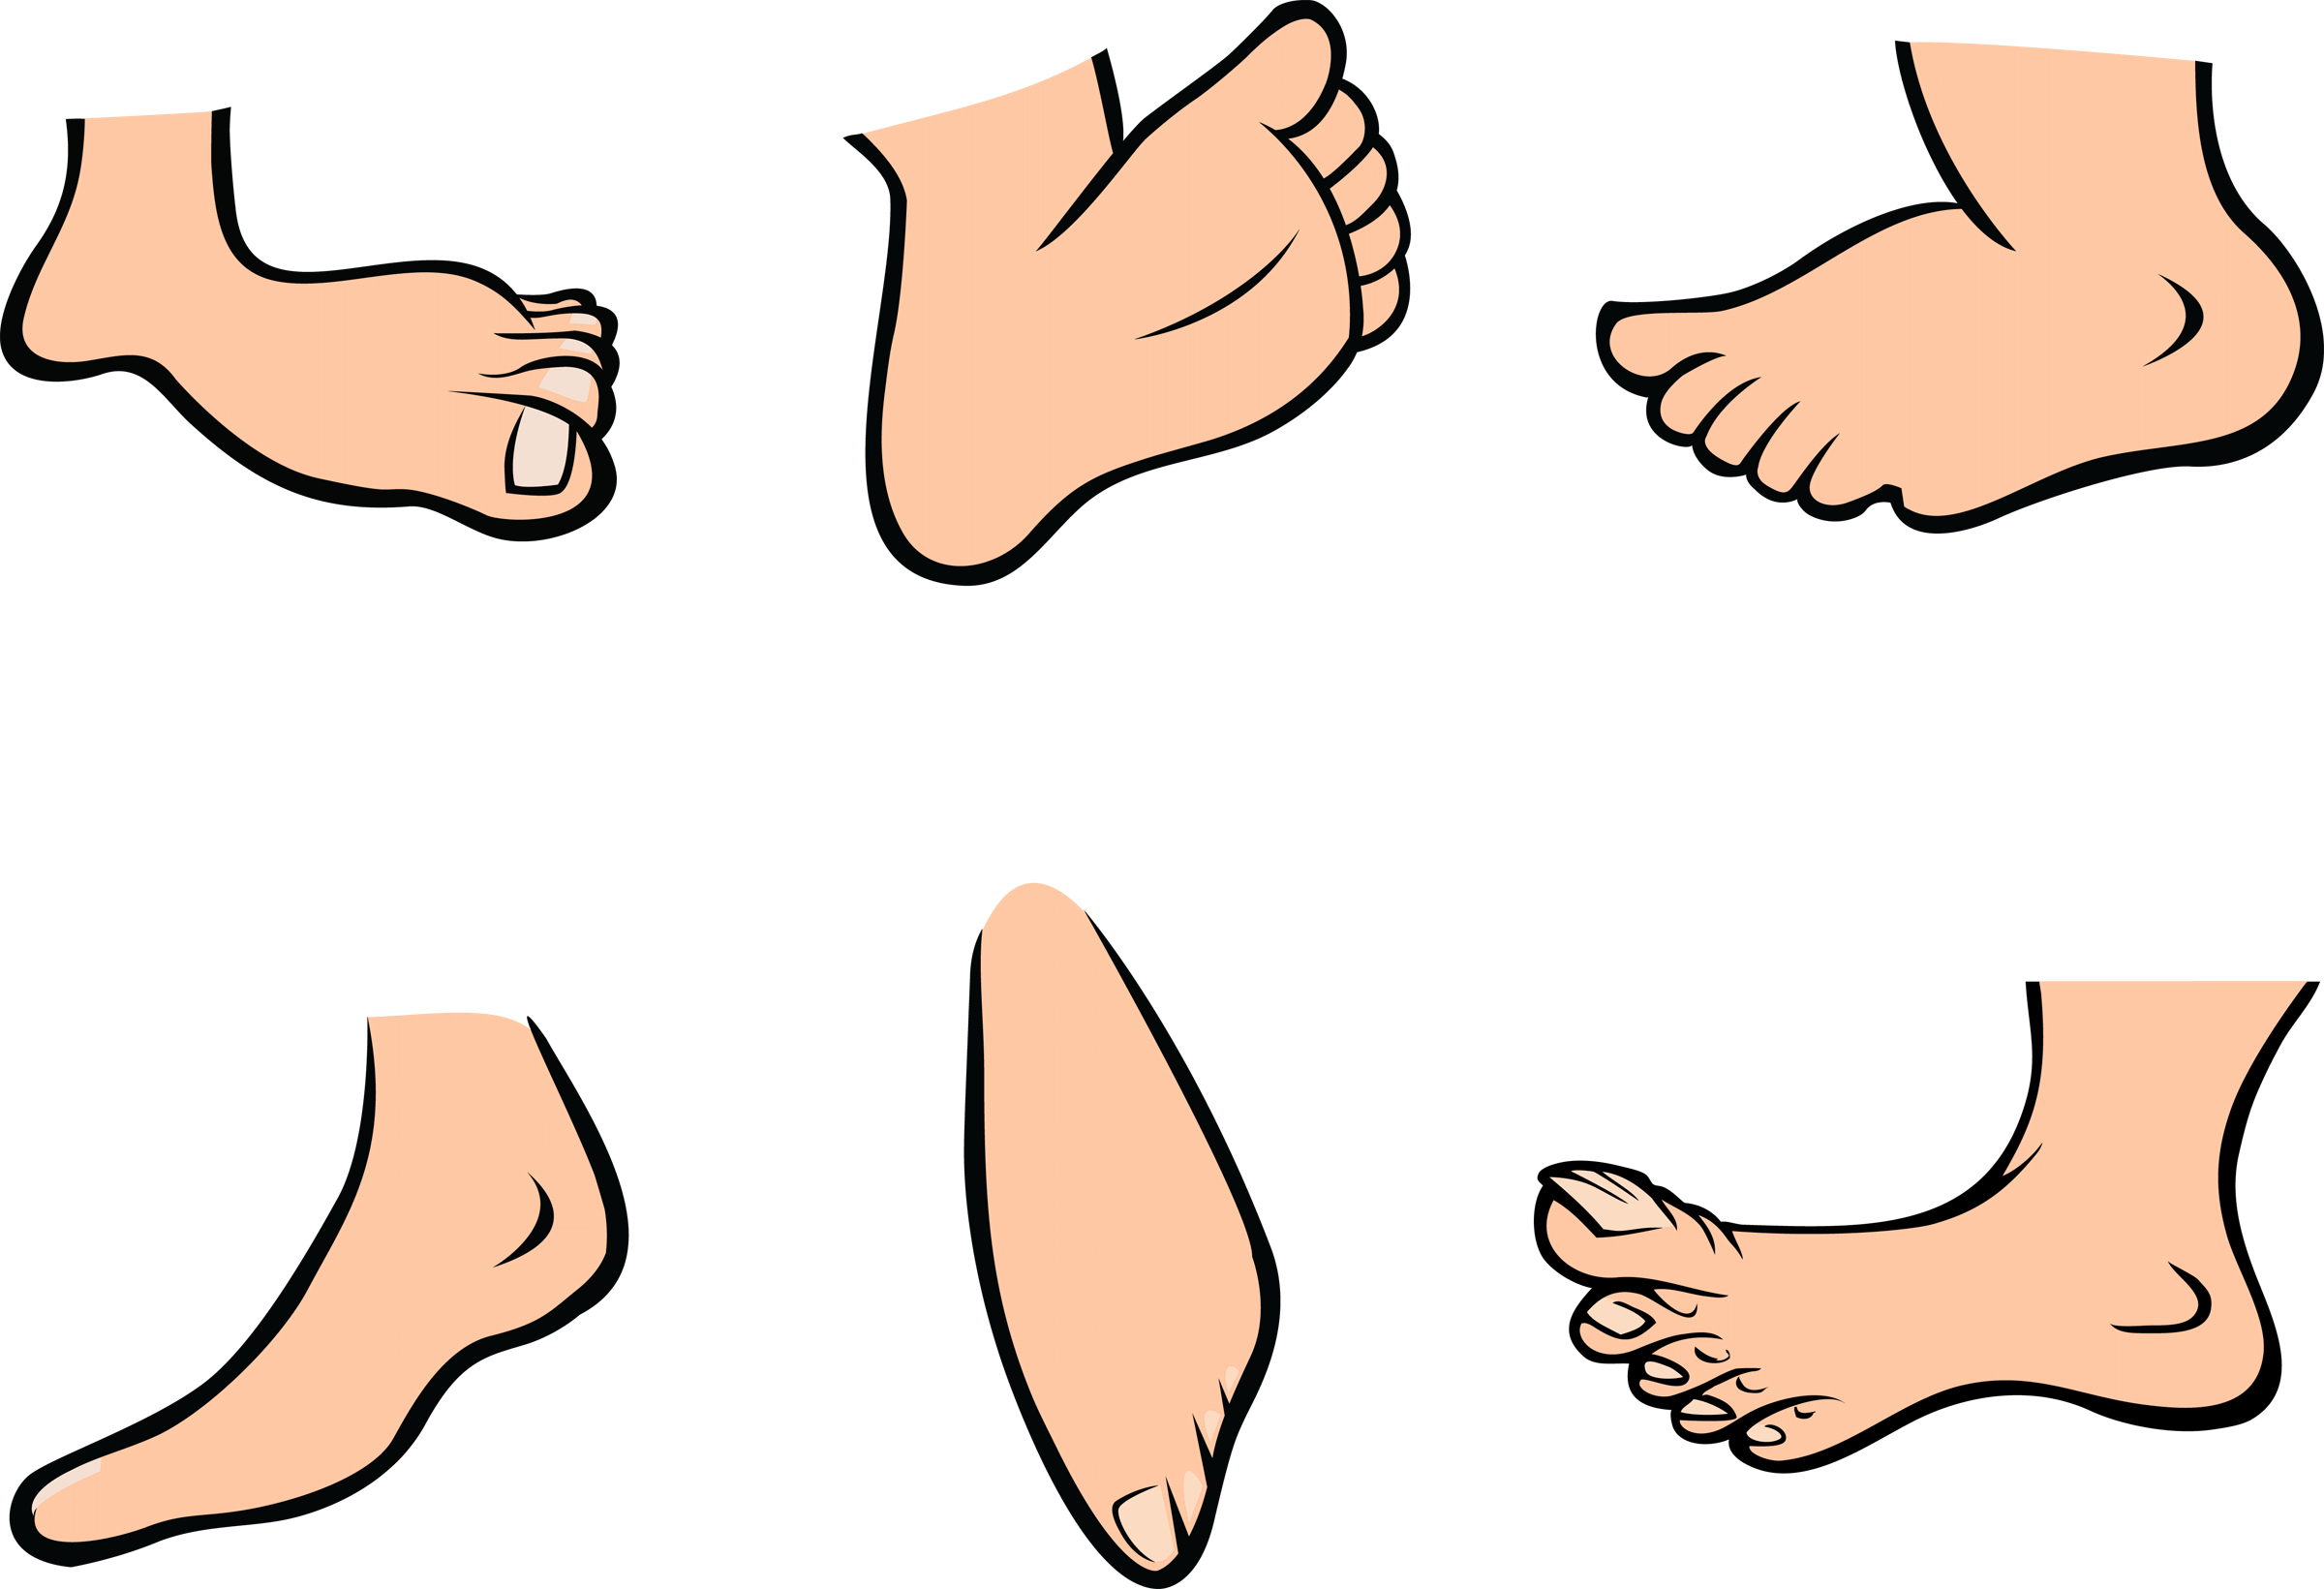 Legs clipart foot stomping. Cartoon feet images free